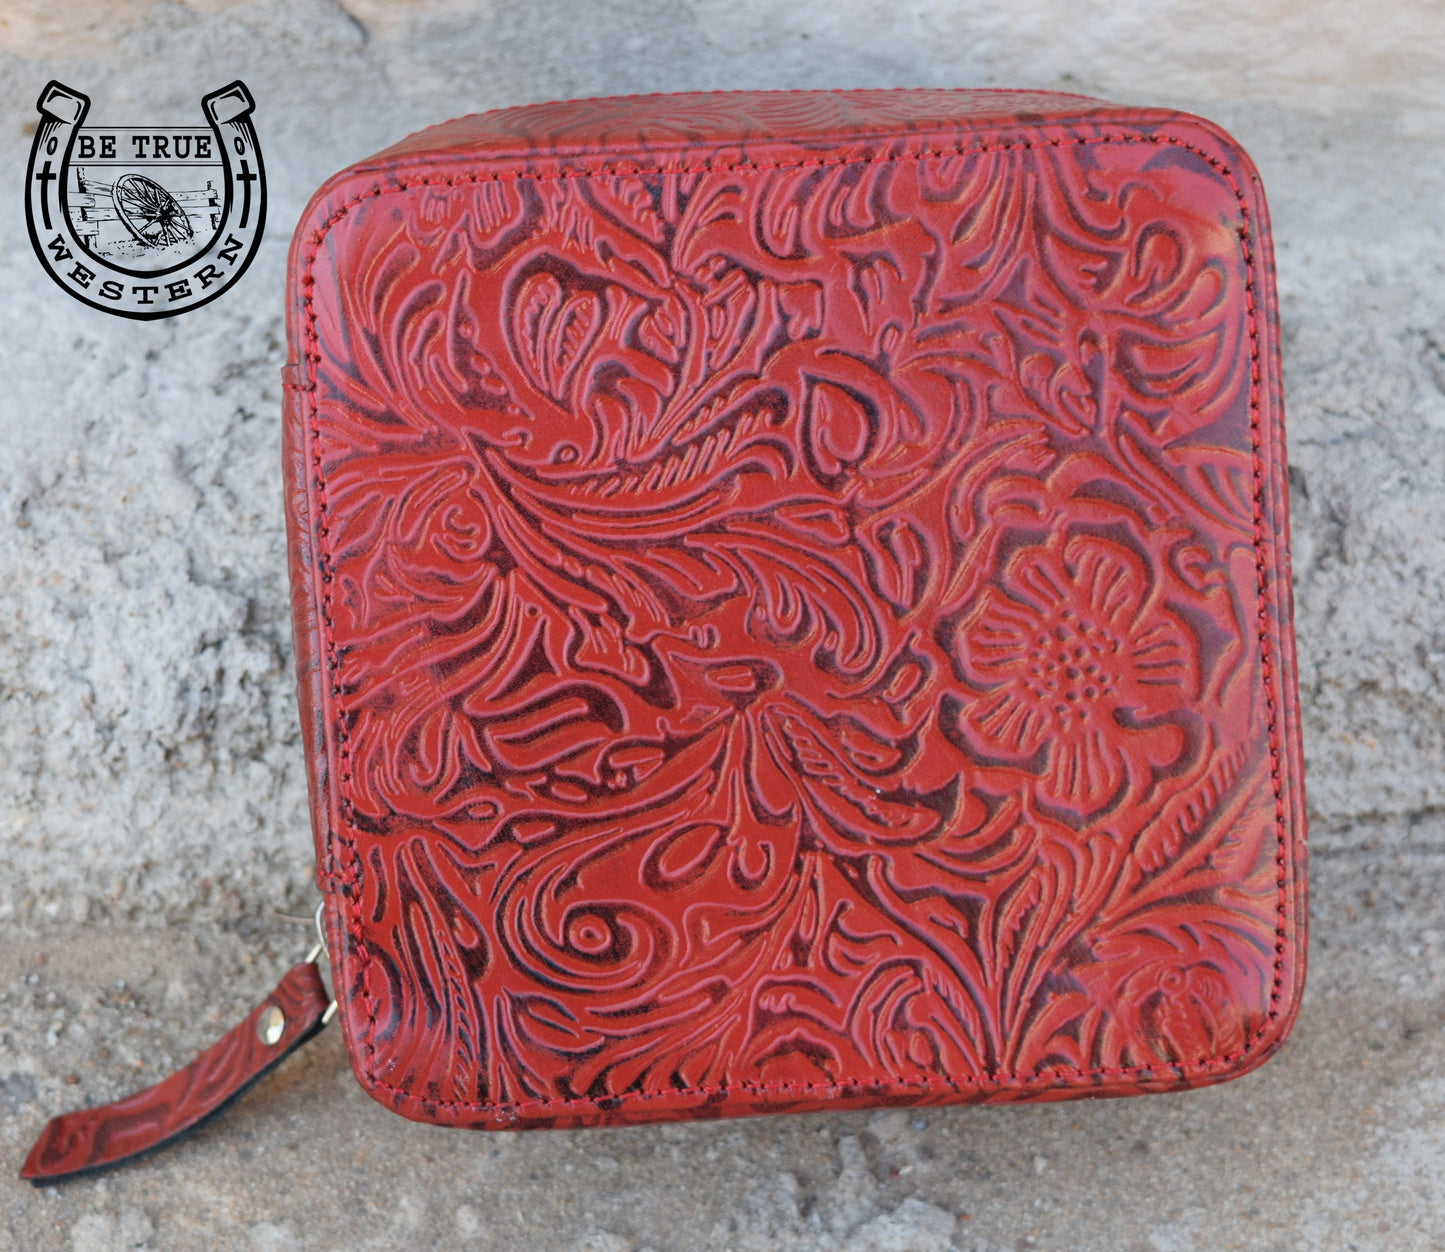 The Red Leather Cowhide Jewelry Case